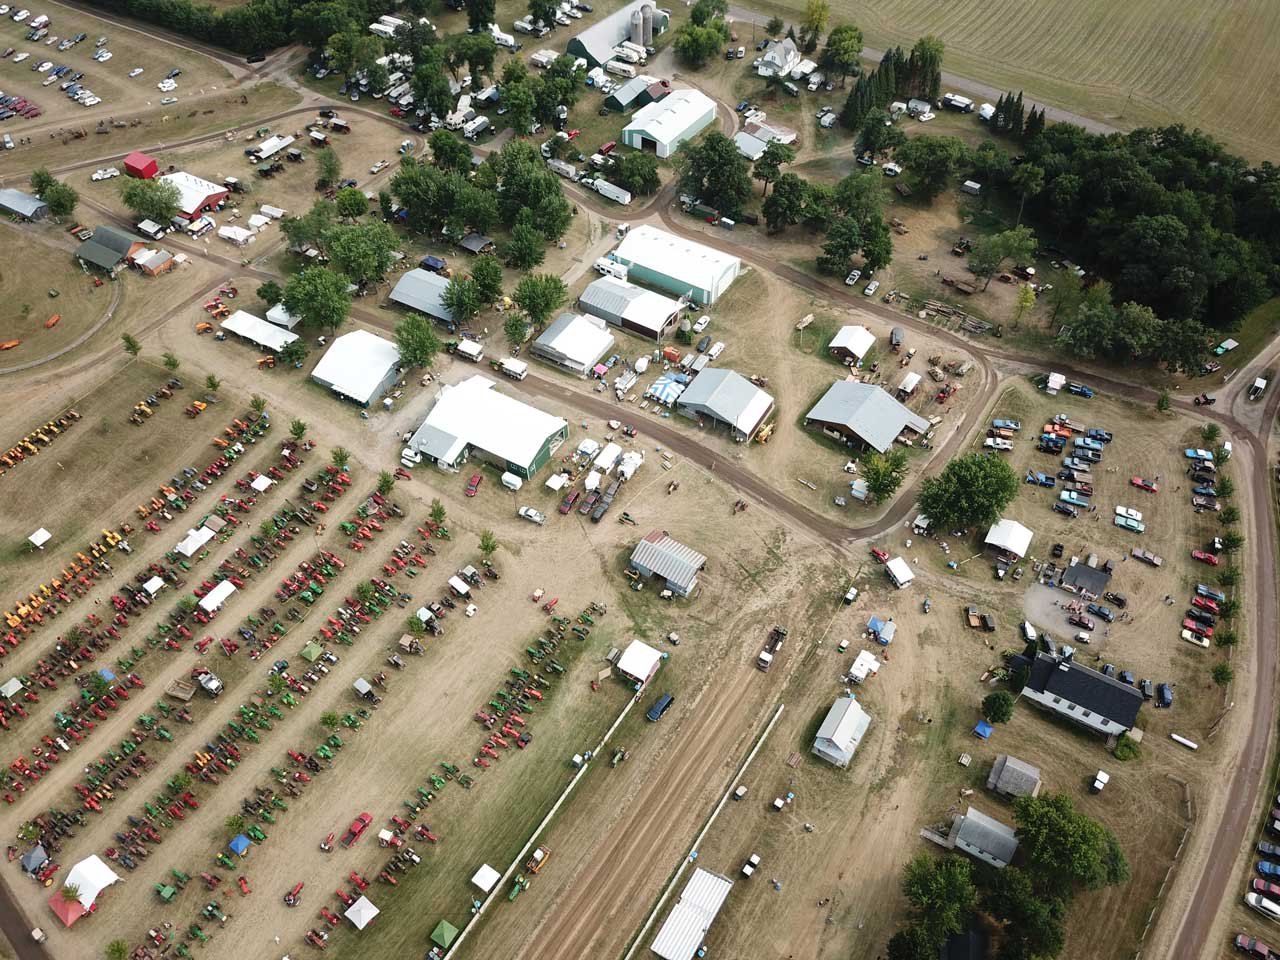 Aerial of the Show Grounds from the 2018 show